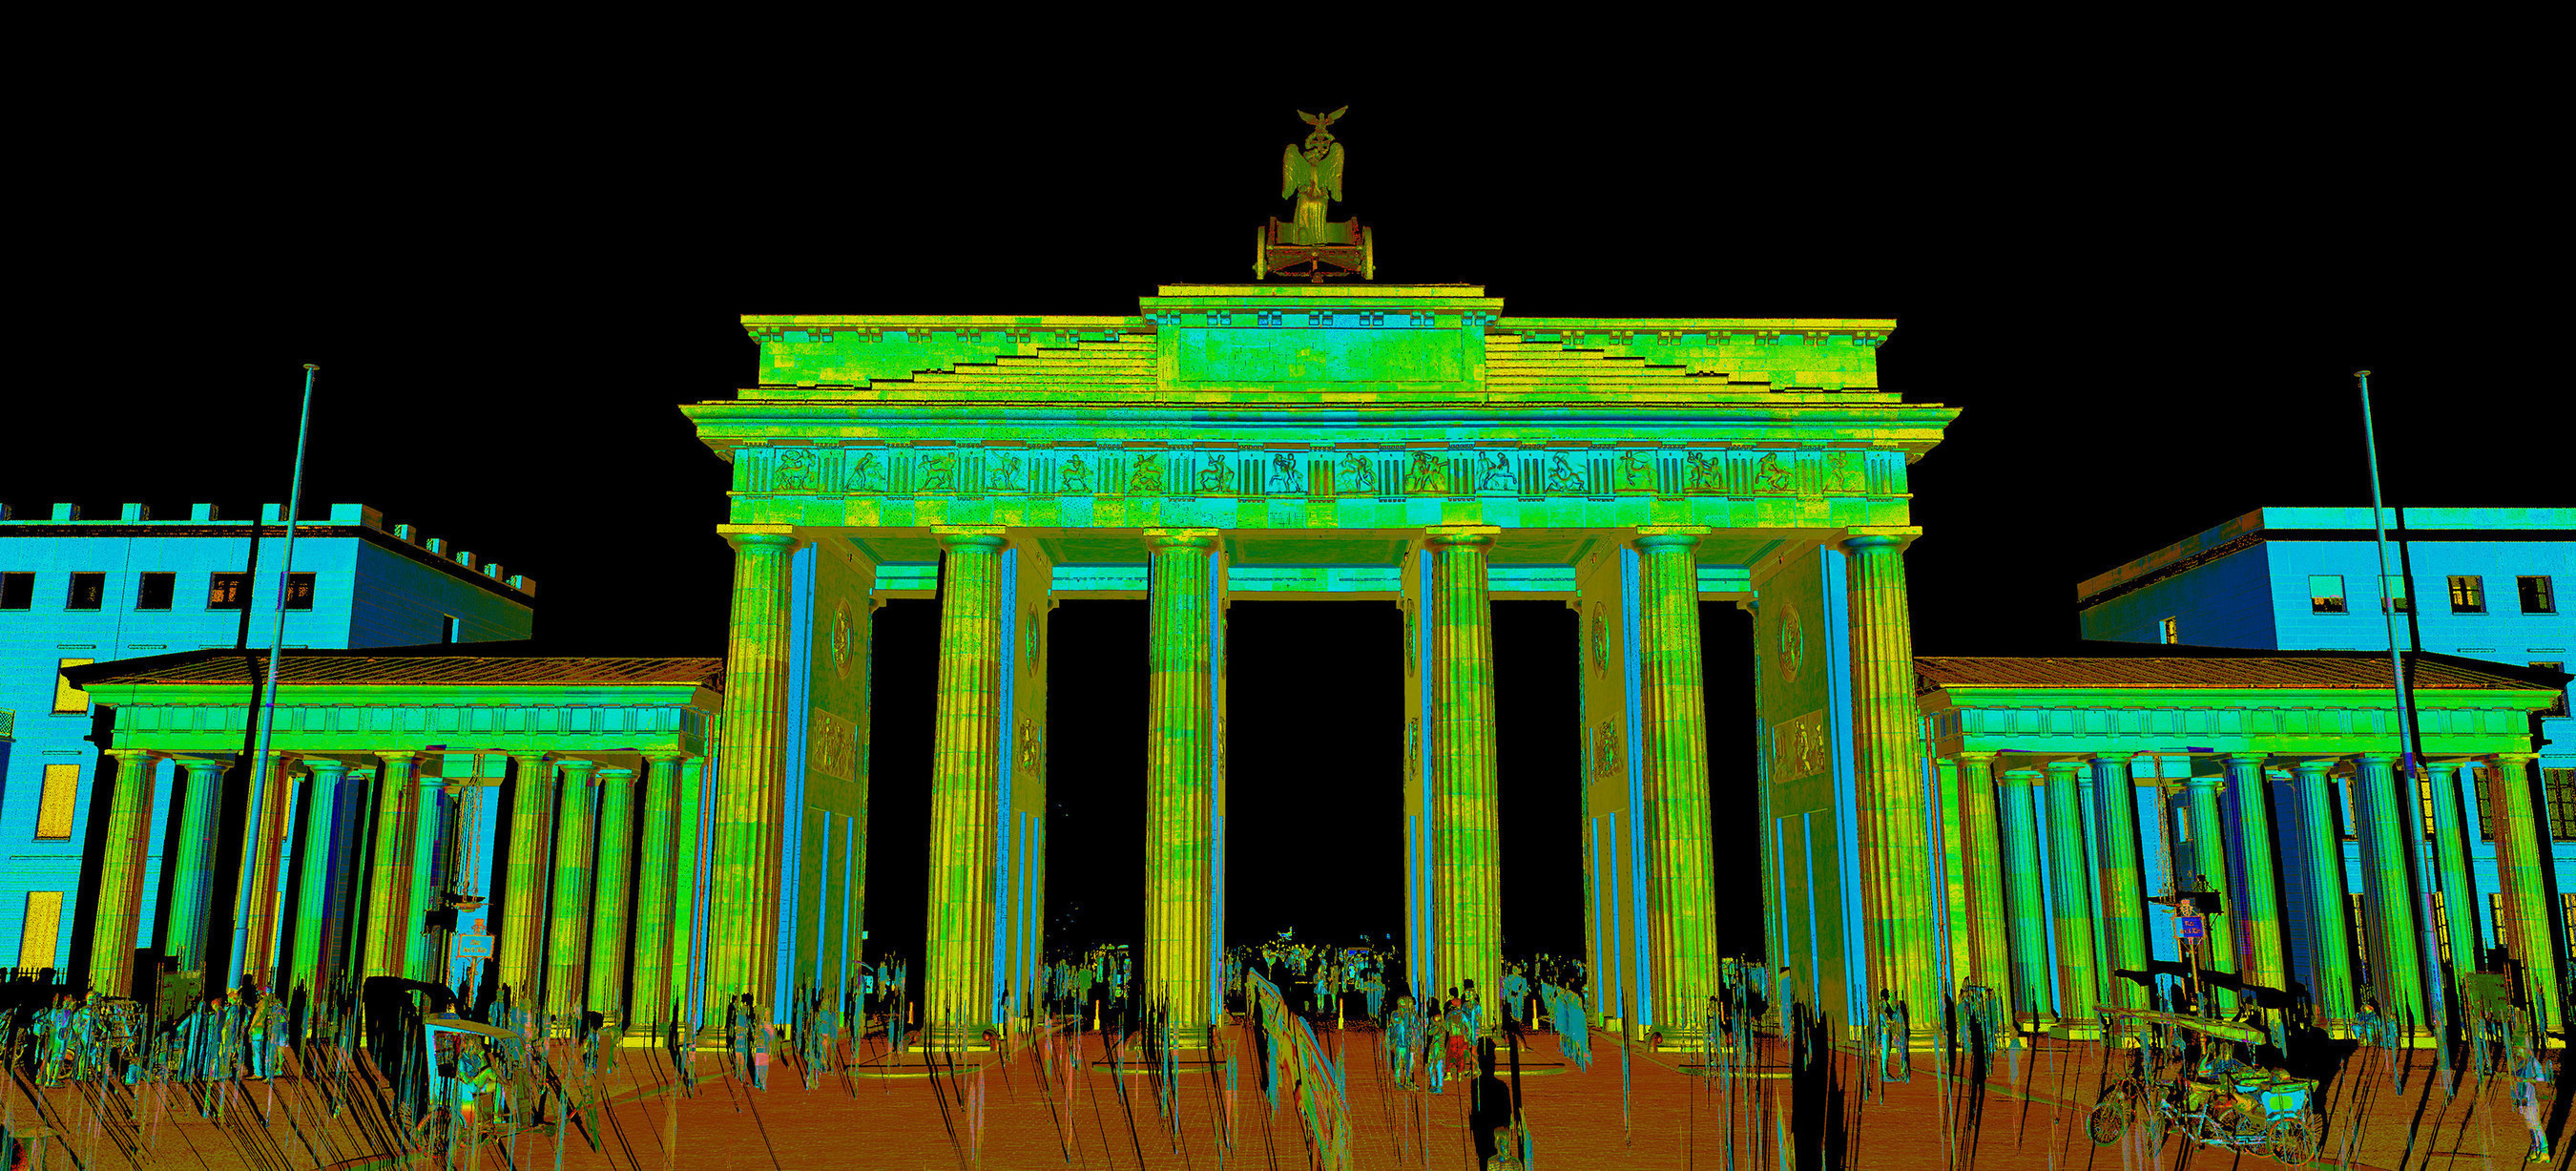 Brandenburg Gate 3d Mapped With Lasers To Mark The 25th Anniversary Of German Reunification